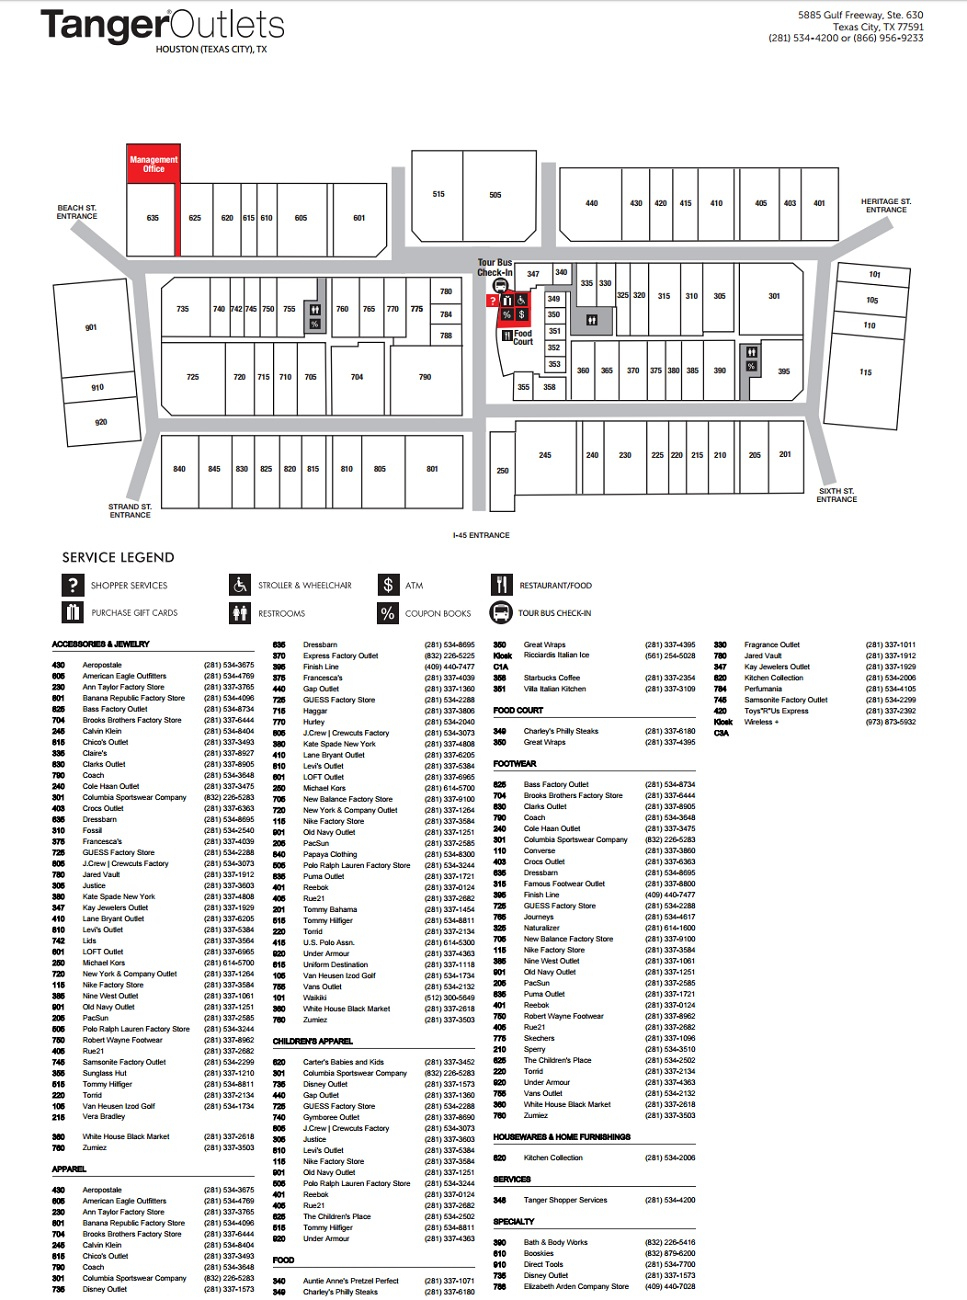 Tanger Outlet Houston (85 Stores) - Outlet Shopping In Texas City - Tanger Outlet Texas City Map